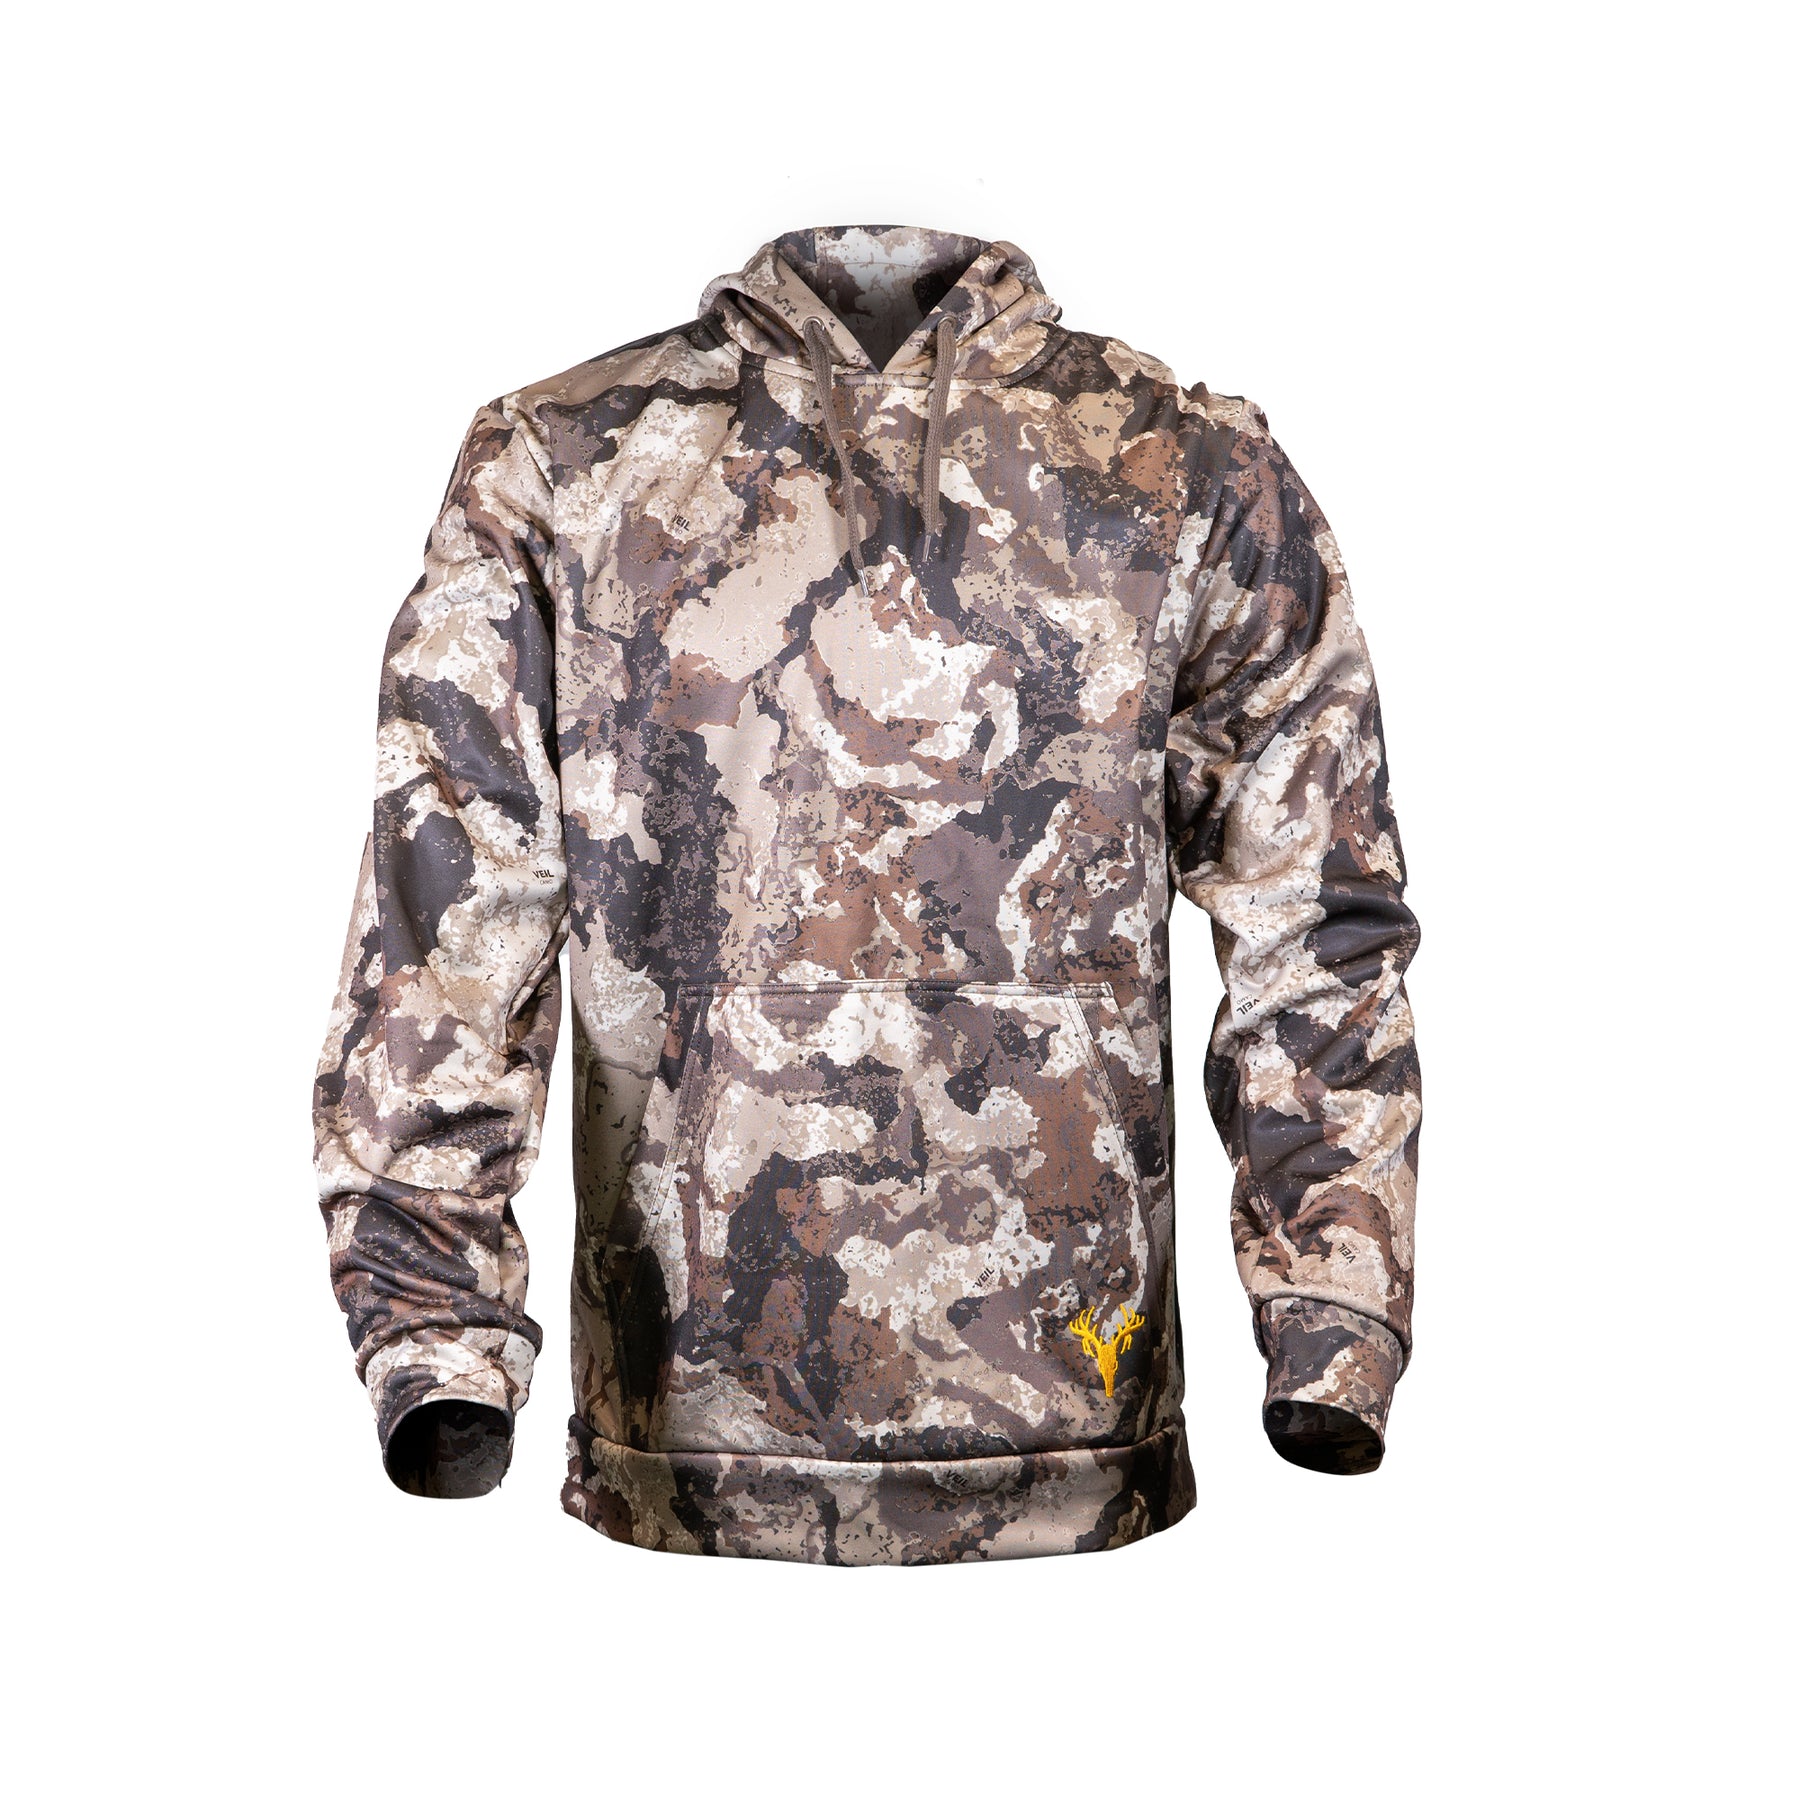 Hunting Apparel, Camo Hunting Clothes, Ghillie Suit, Camo Jacket